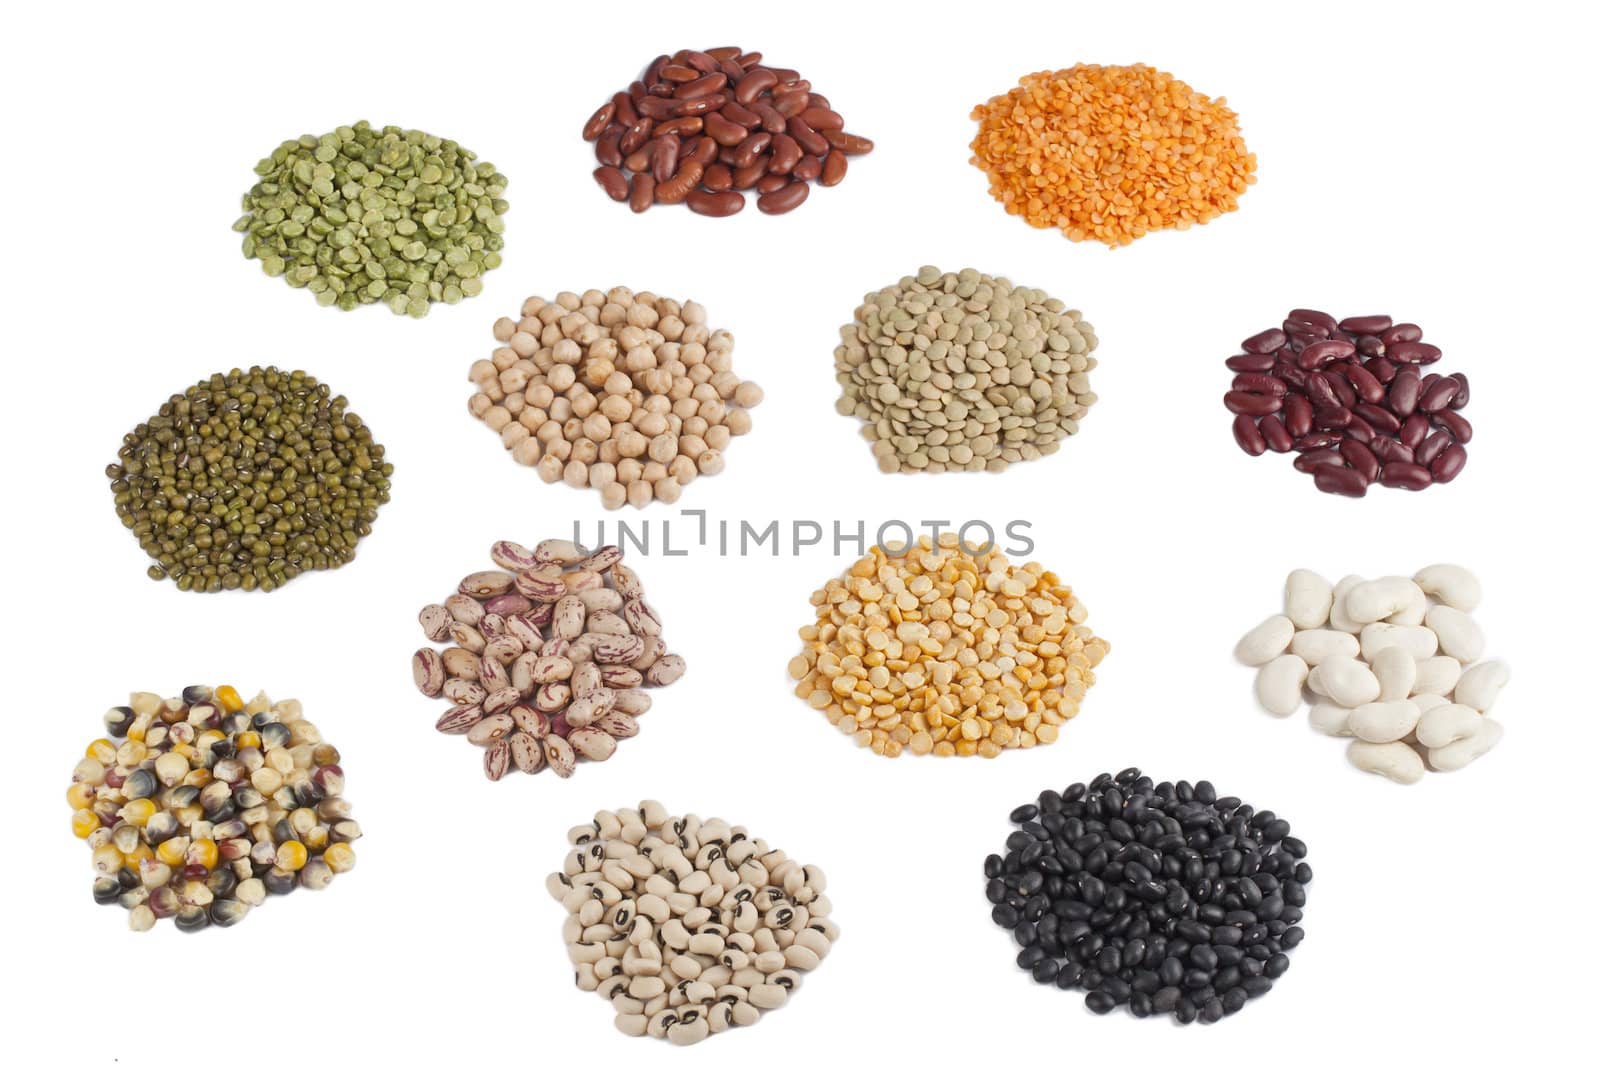 variety of beans and pulses by kozzi